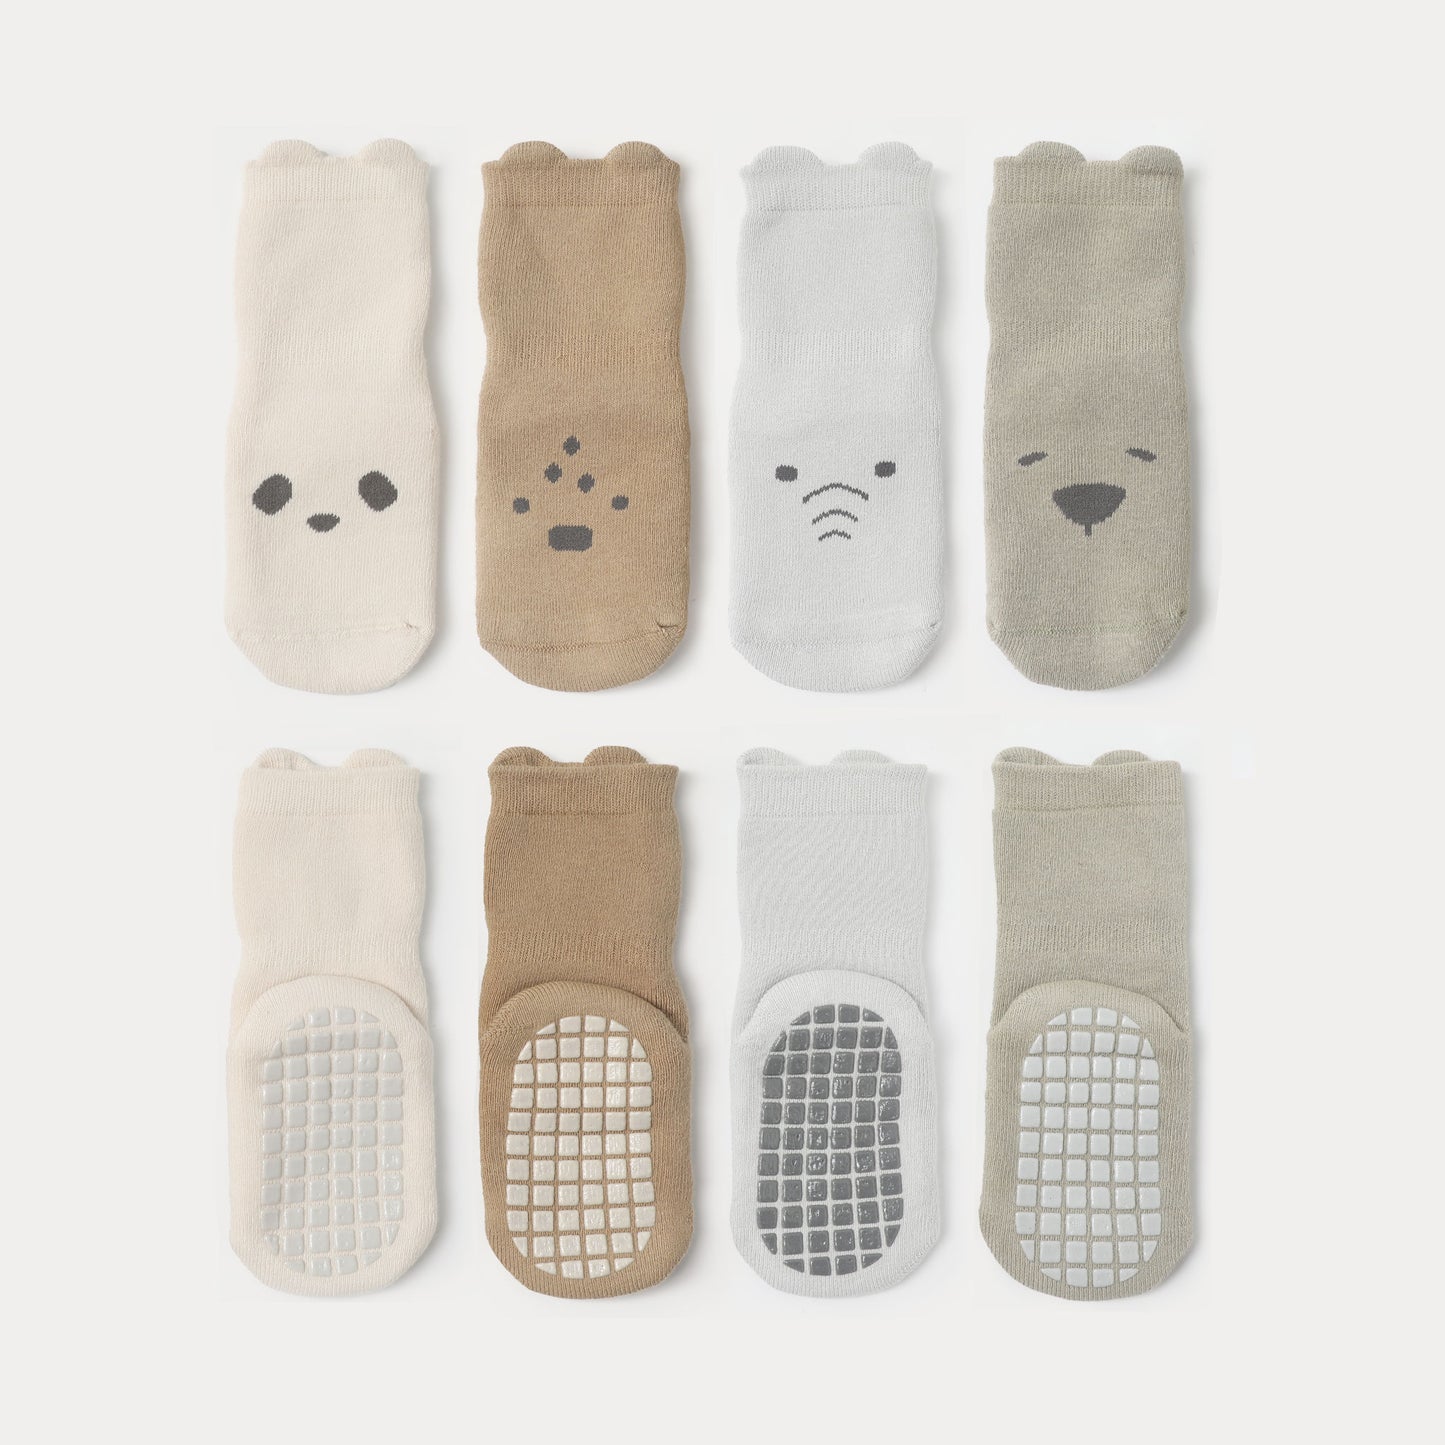 Into The Wild II - Extra Warm- 4 Pairs of Stay-On Baby & Toddler Non-Slip Socks